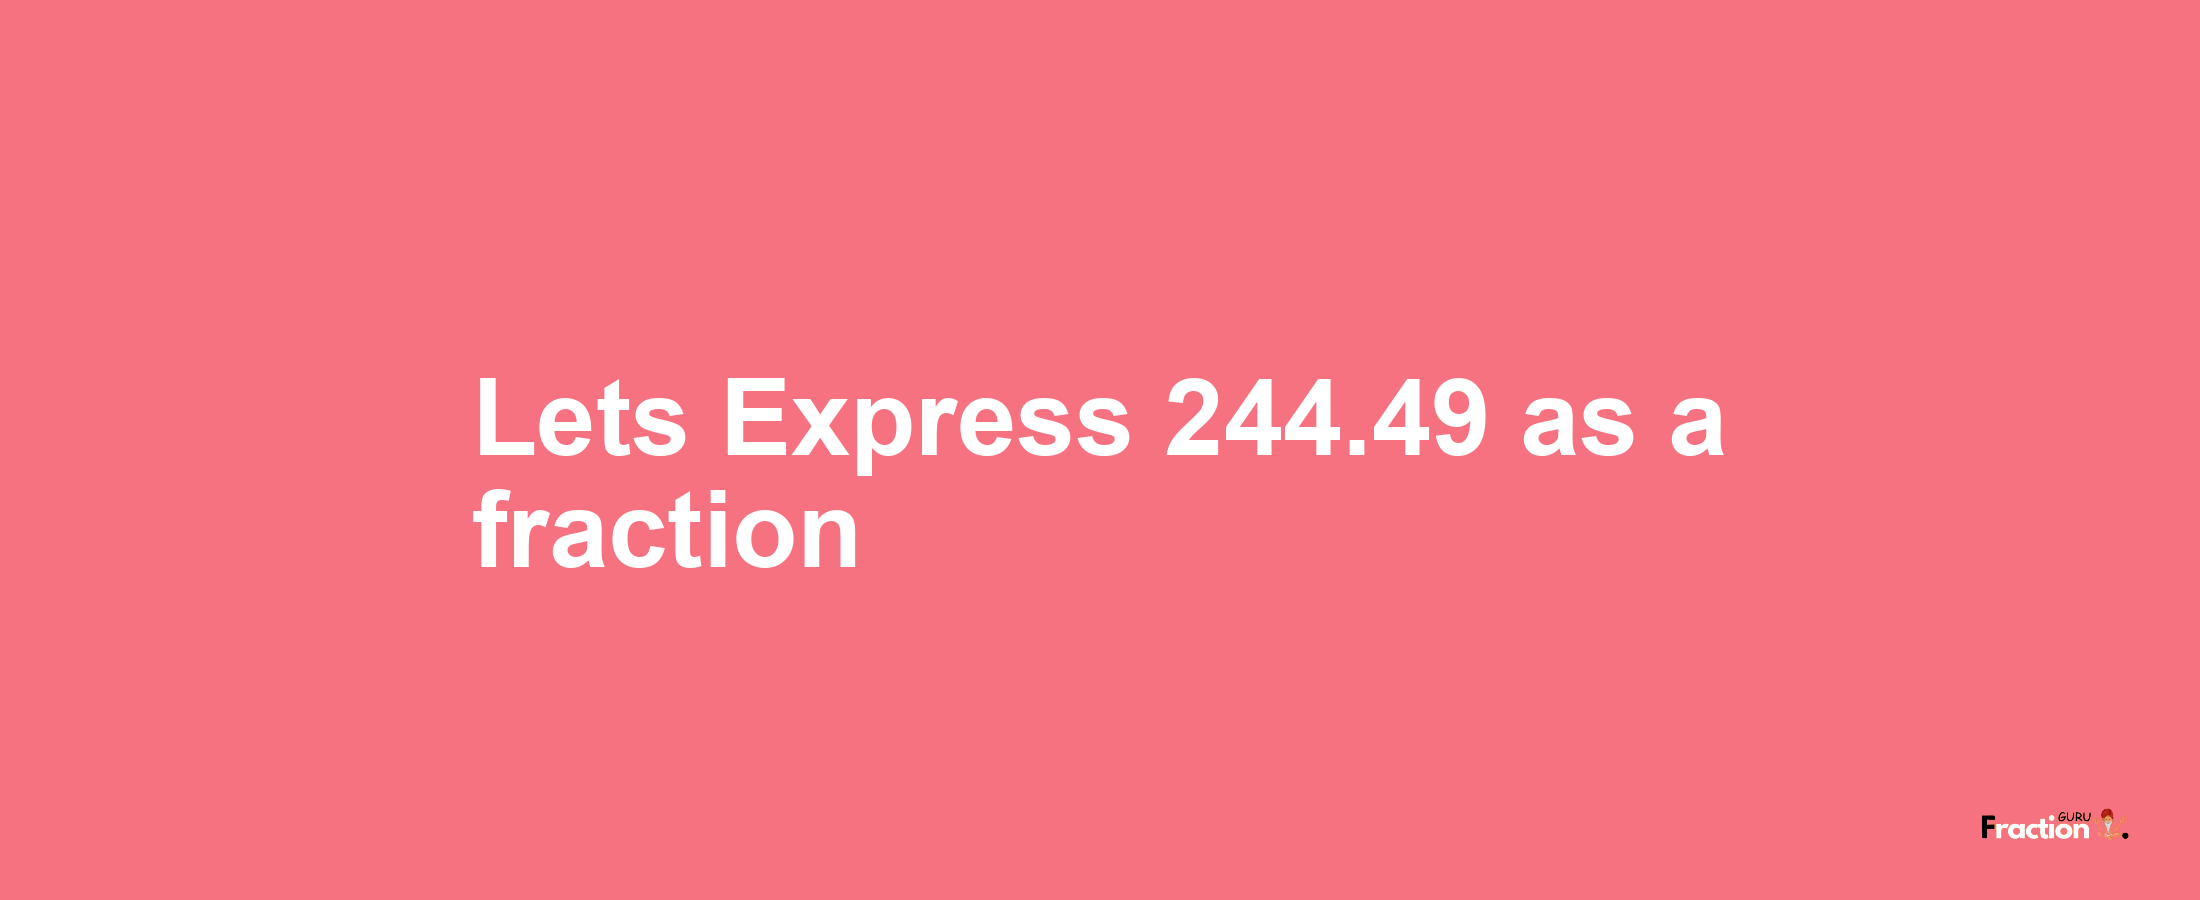 Lets Express 244.49 as afraction